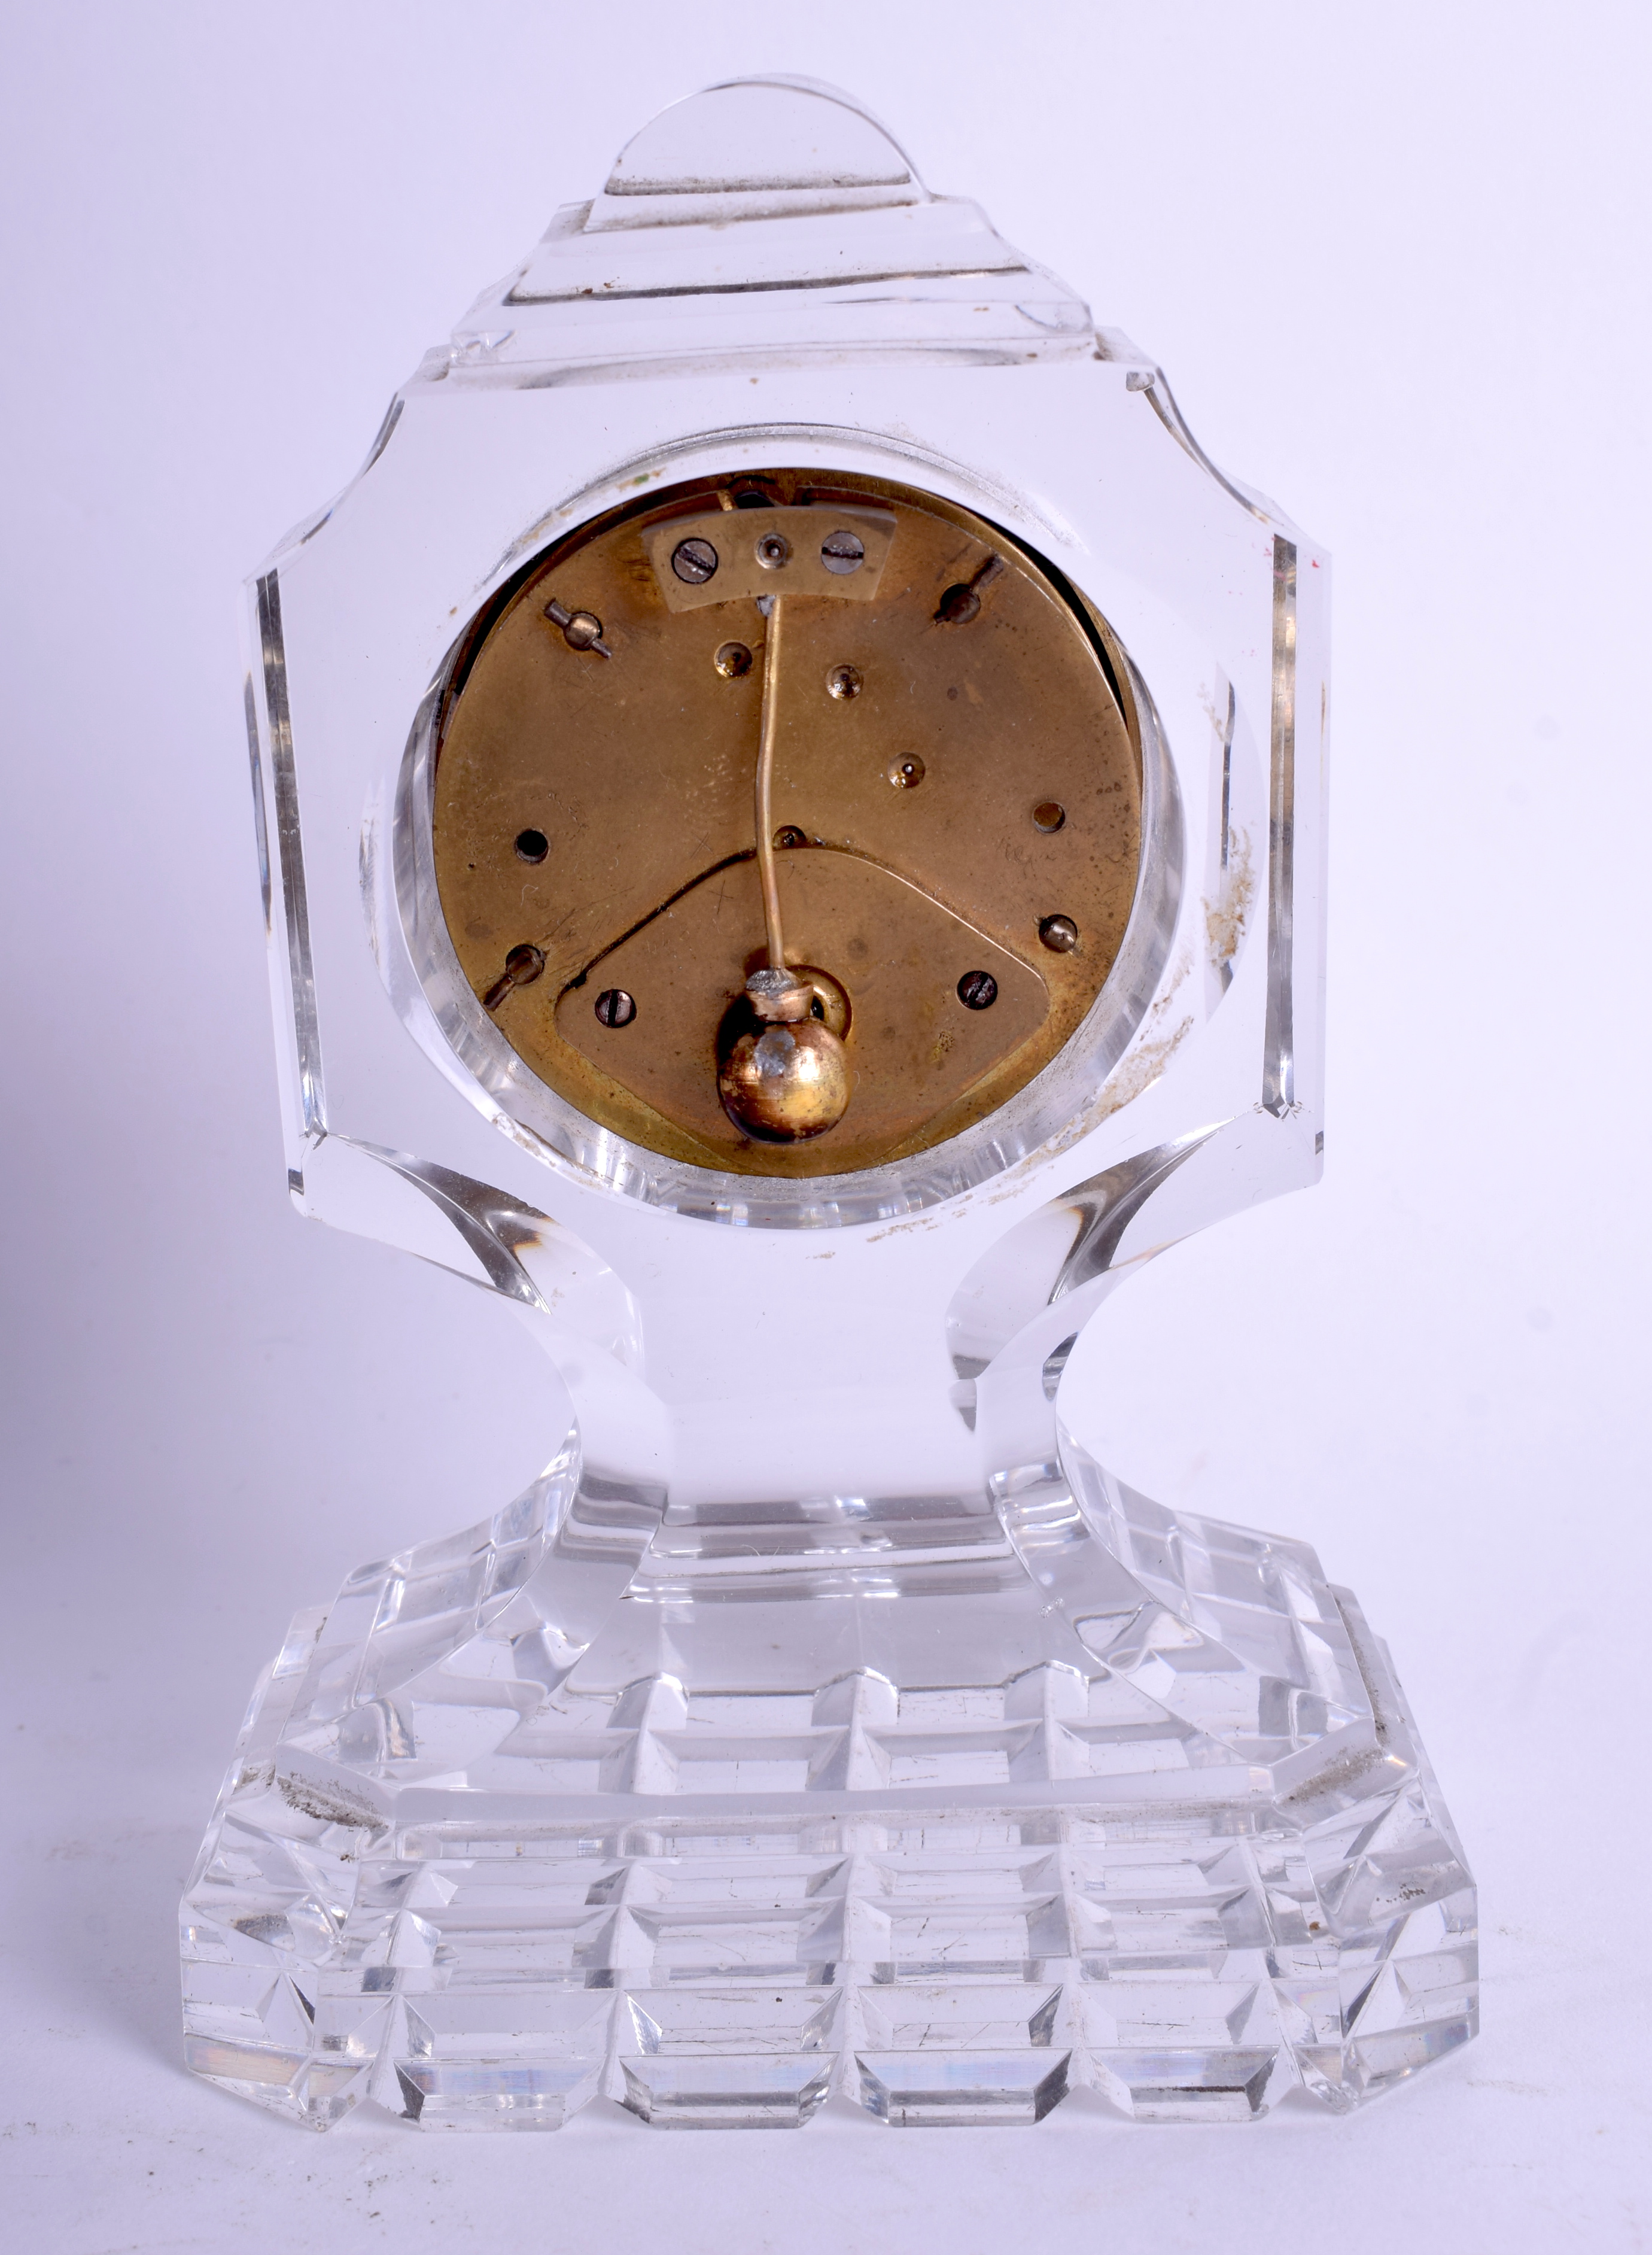 A REGENCY CARVED CRYSTAL GLASS MINIATURE MANTEL CLOCK with silver mounted dial. 13 cm x 8 cm. - Image 2 of 2